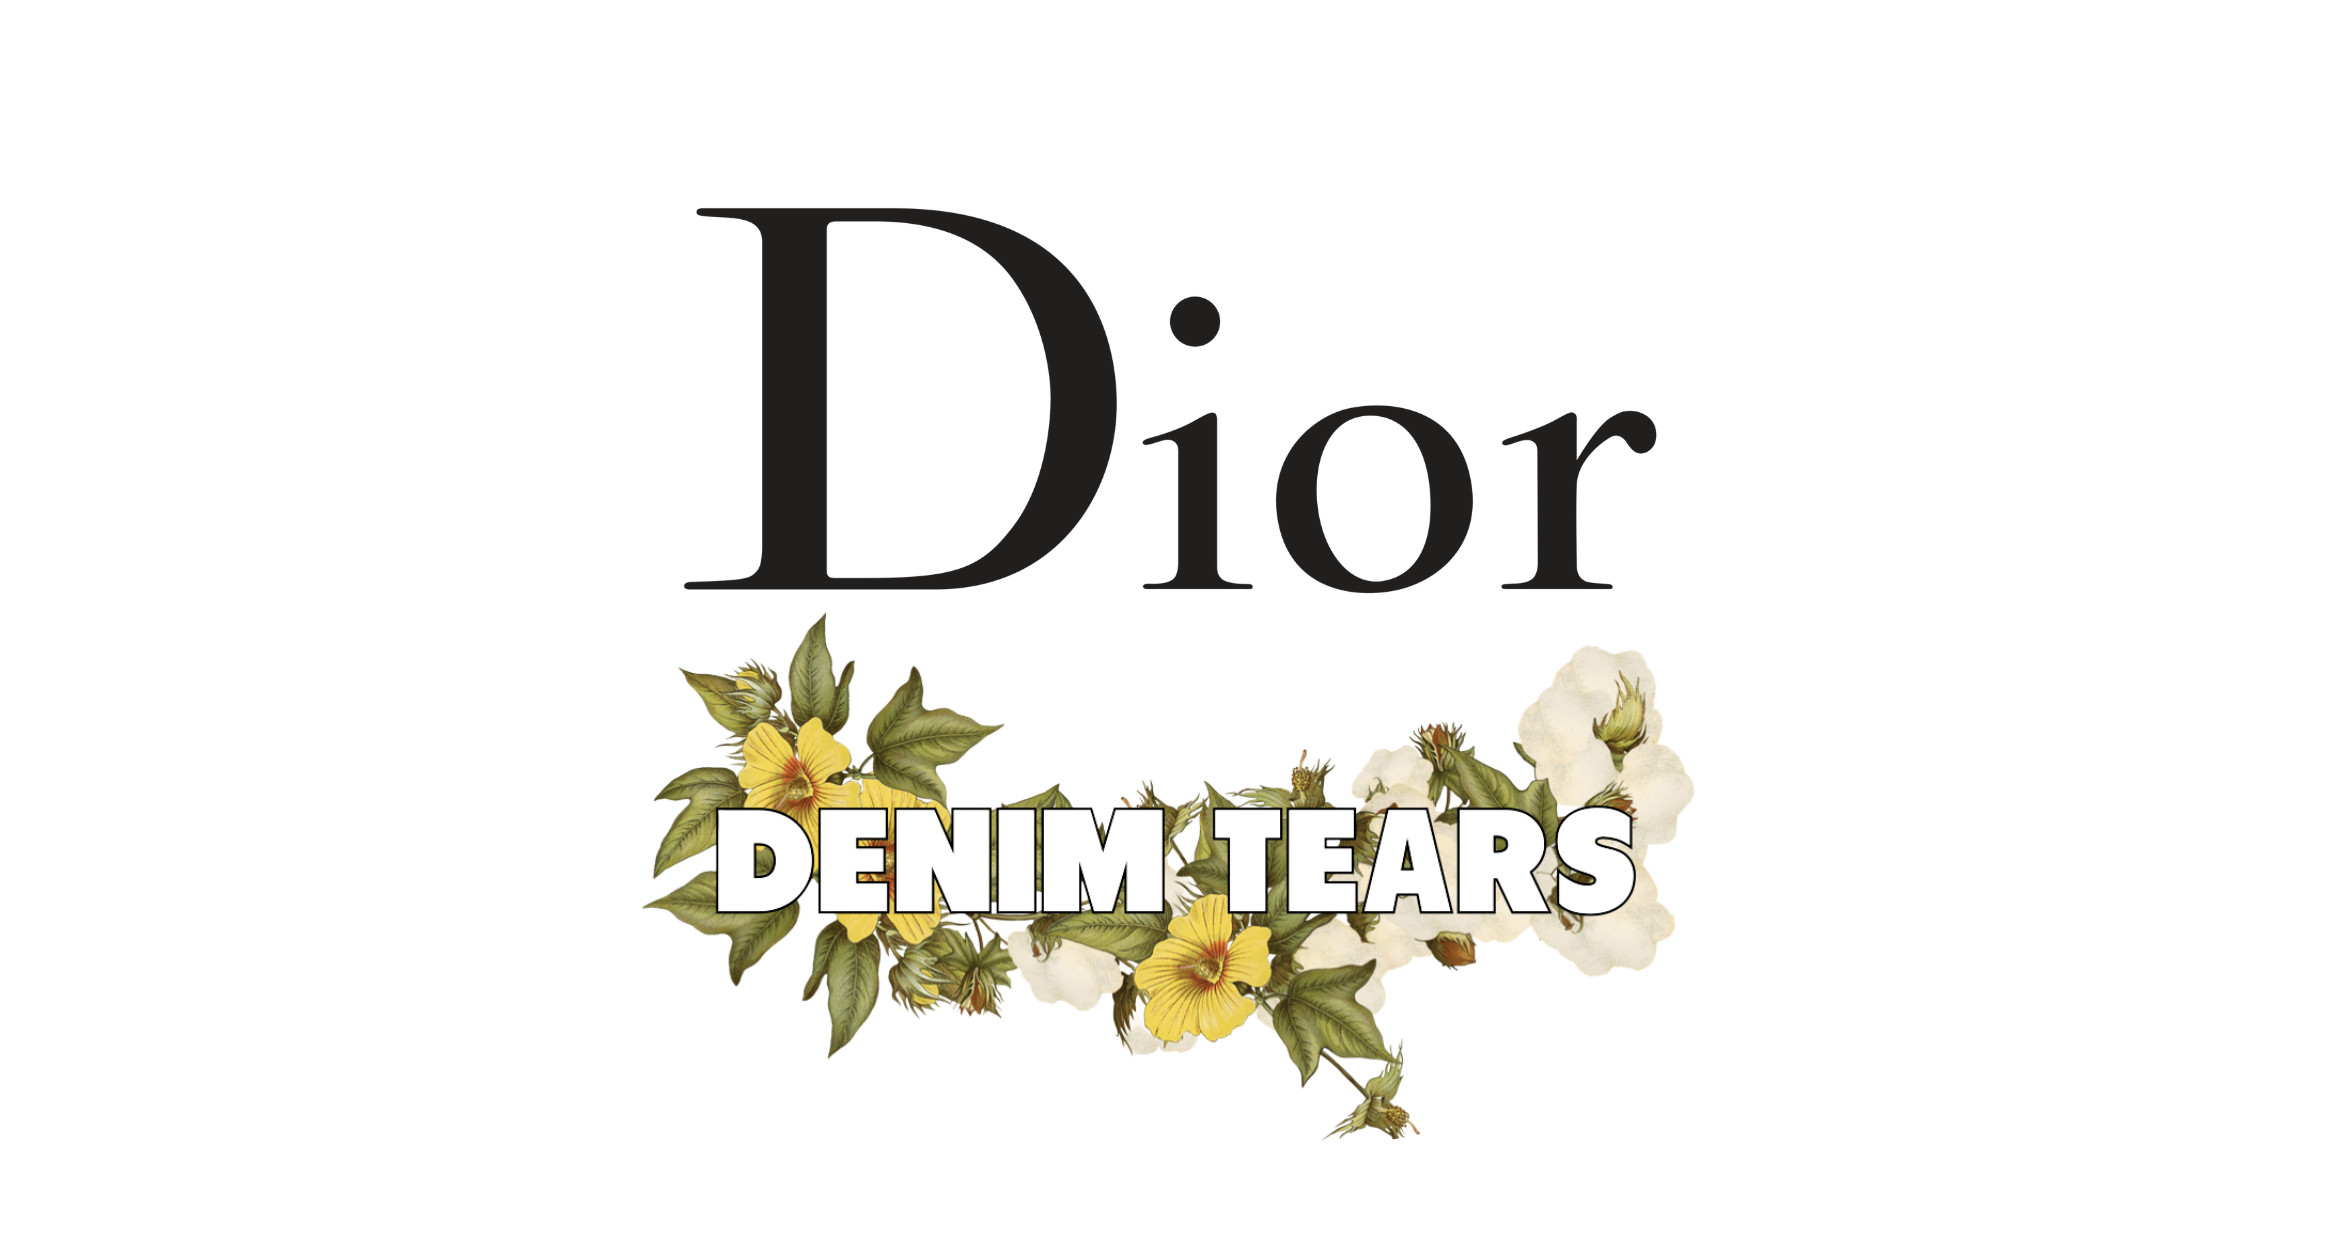 Denim Tears Duets with Dior for a Jazz-Themed Collection – Sourcing Journal